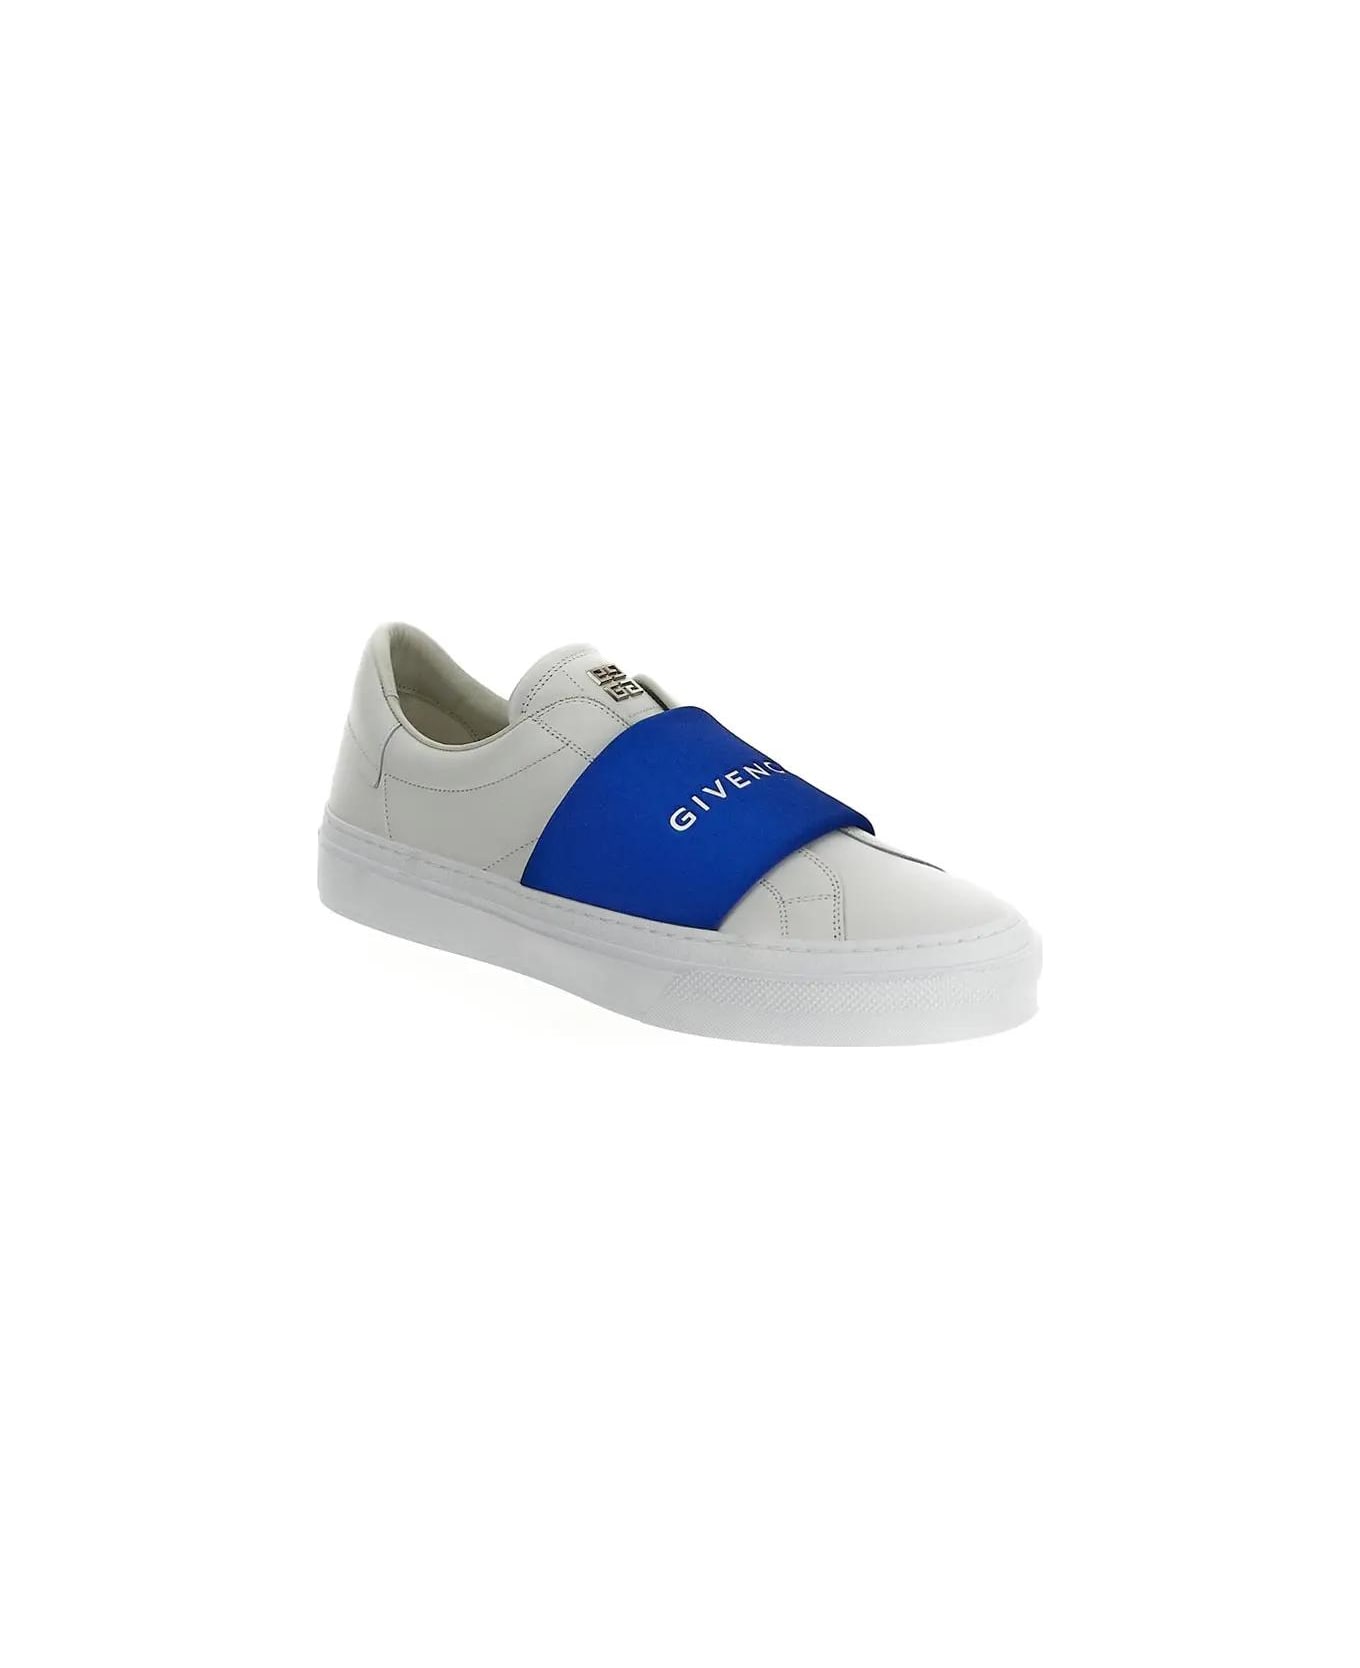 Givenchy City Sport Sneaker - WHITE/BLUE